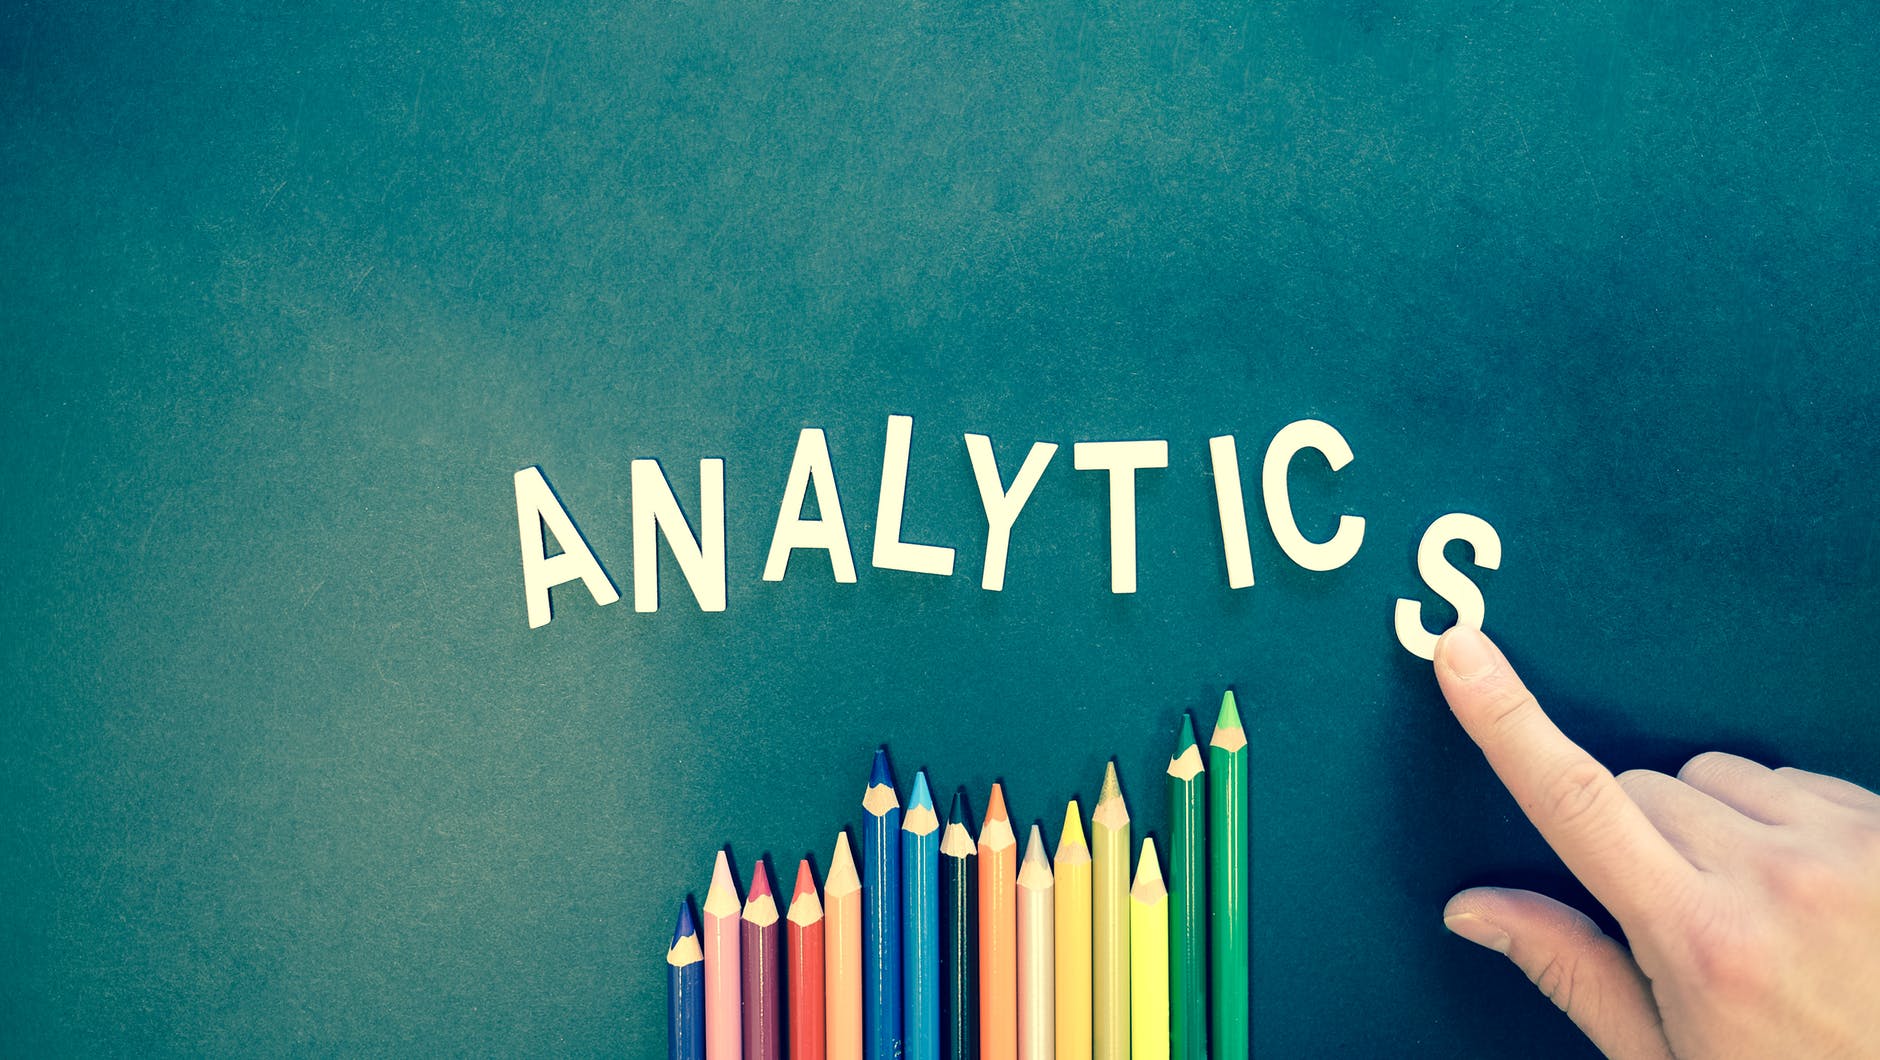 The word 'analytics' with colored pencils pointing to it